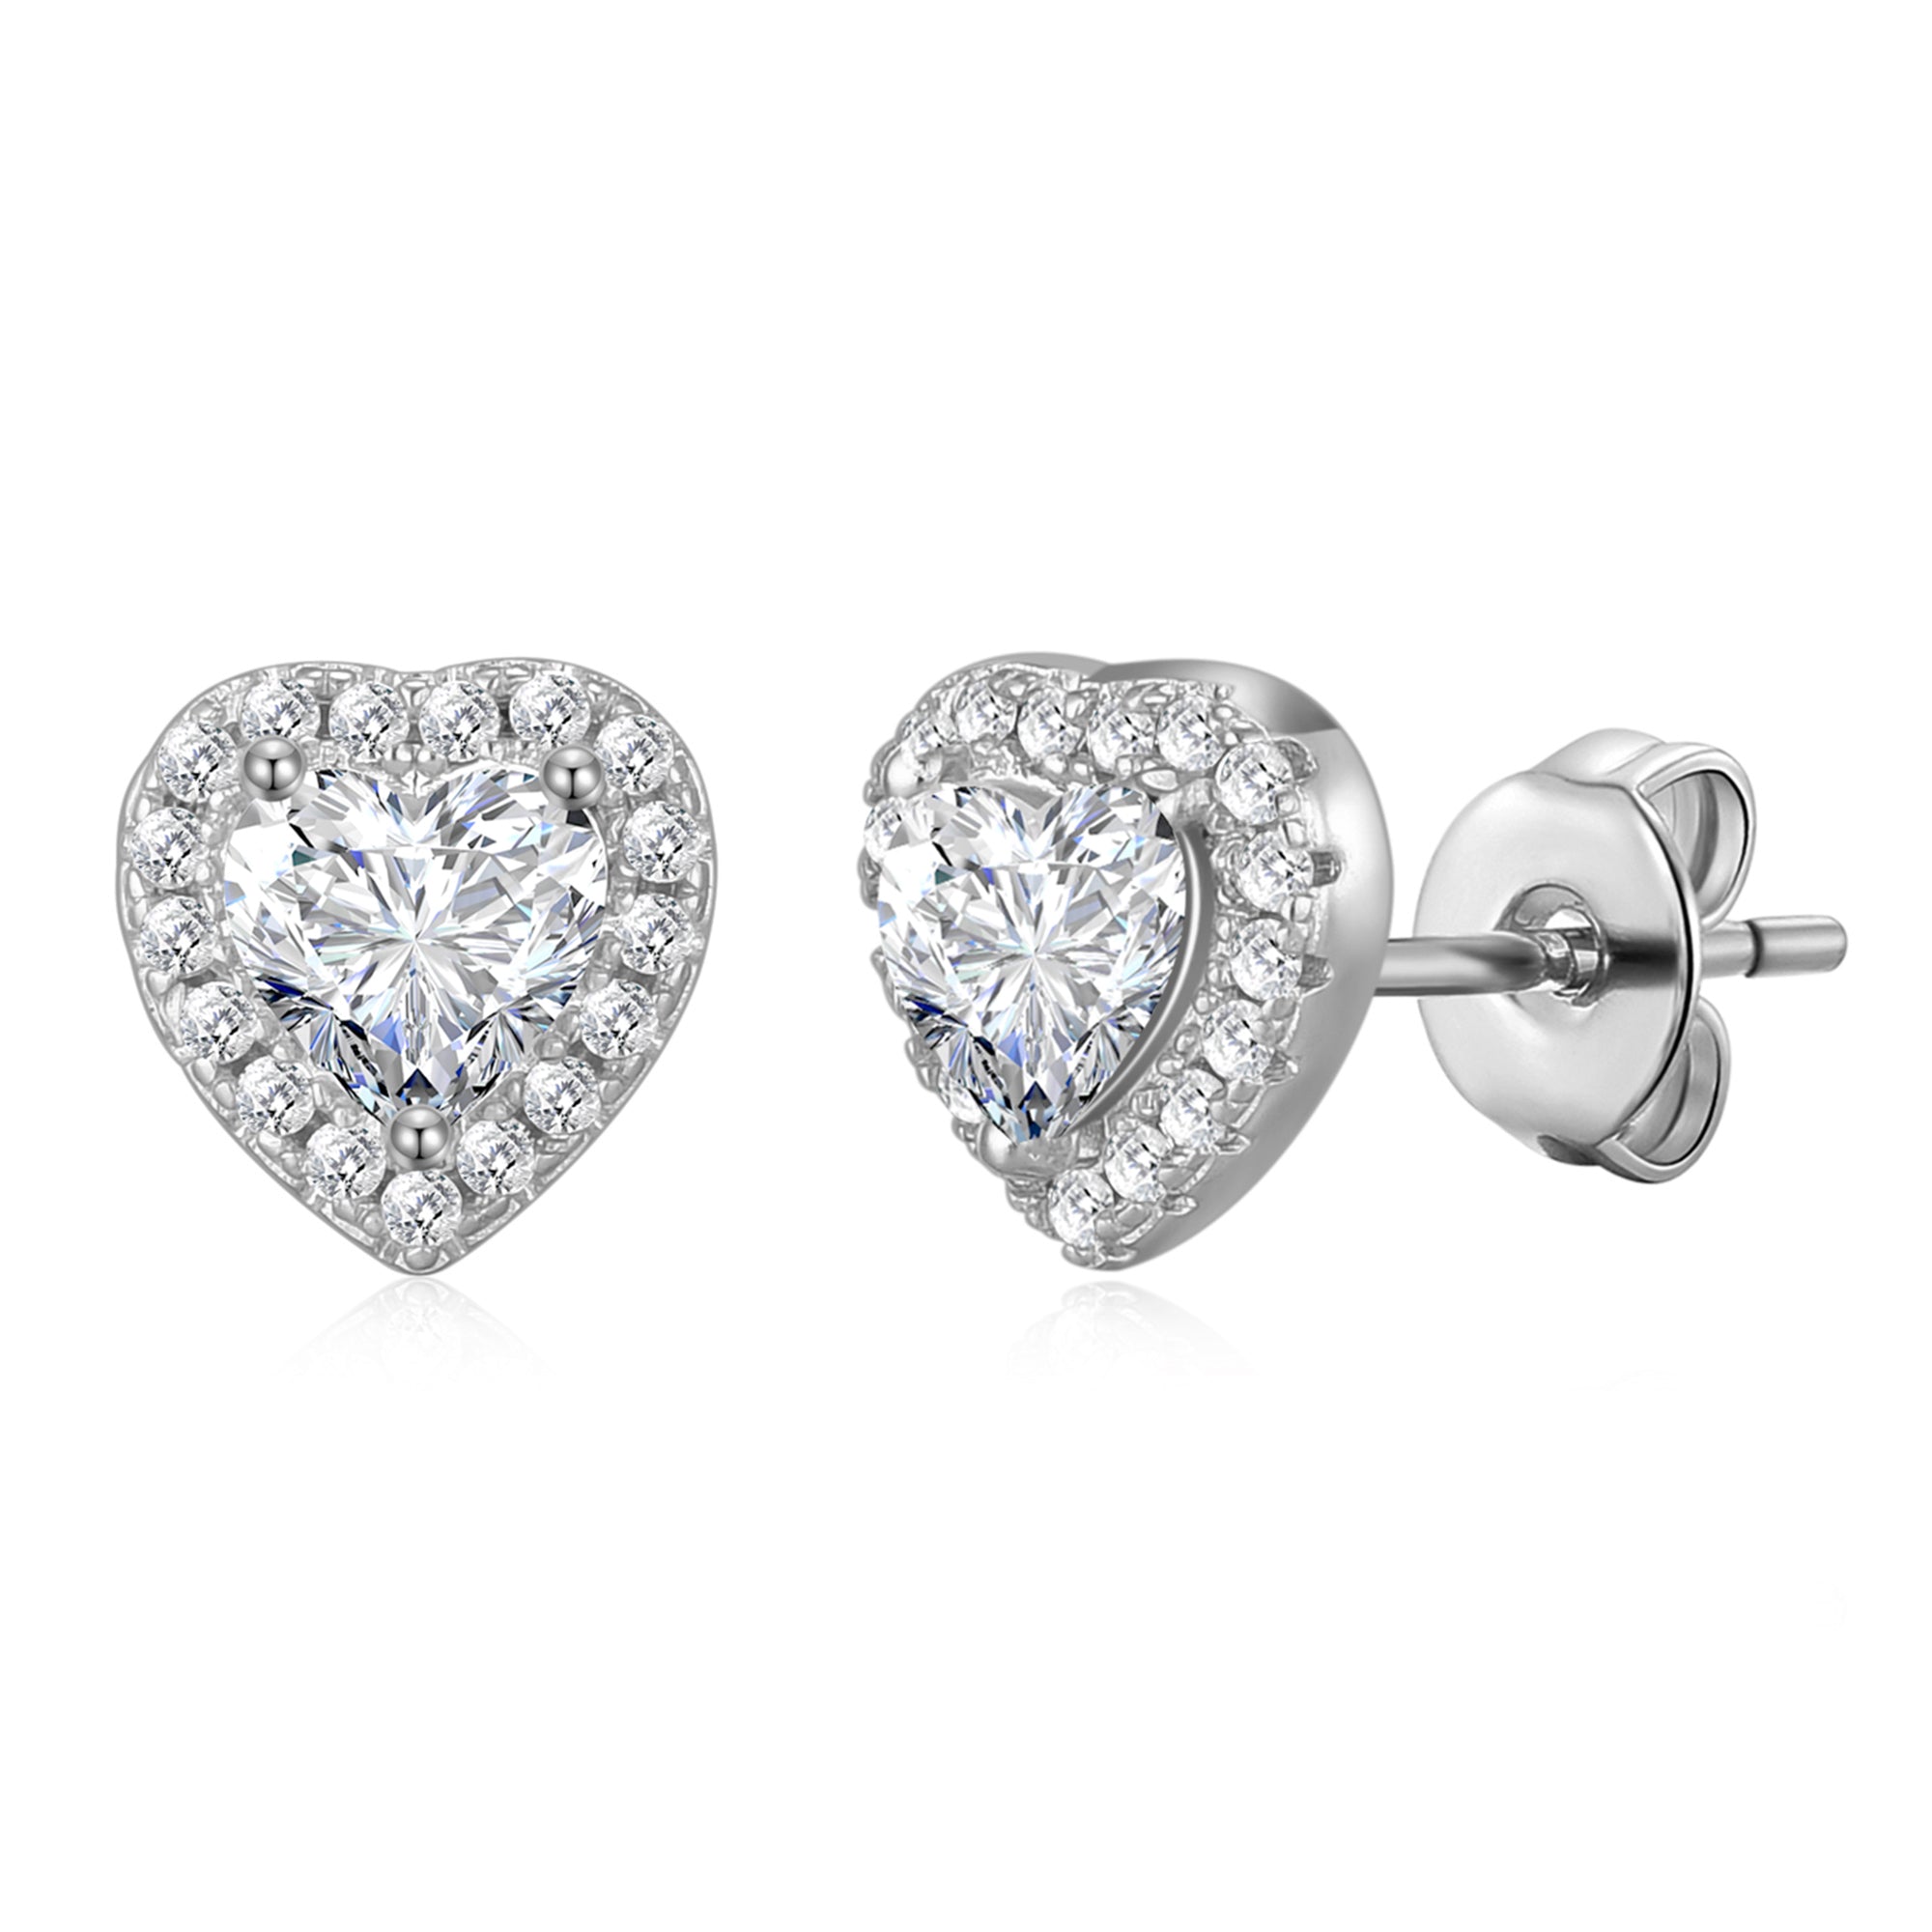 Silver Plated Heart Halo Earrings Created with Zircondia® Crystals by Philip Jones Jewellery